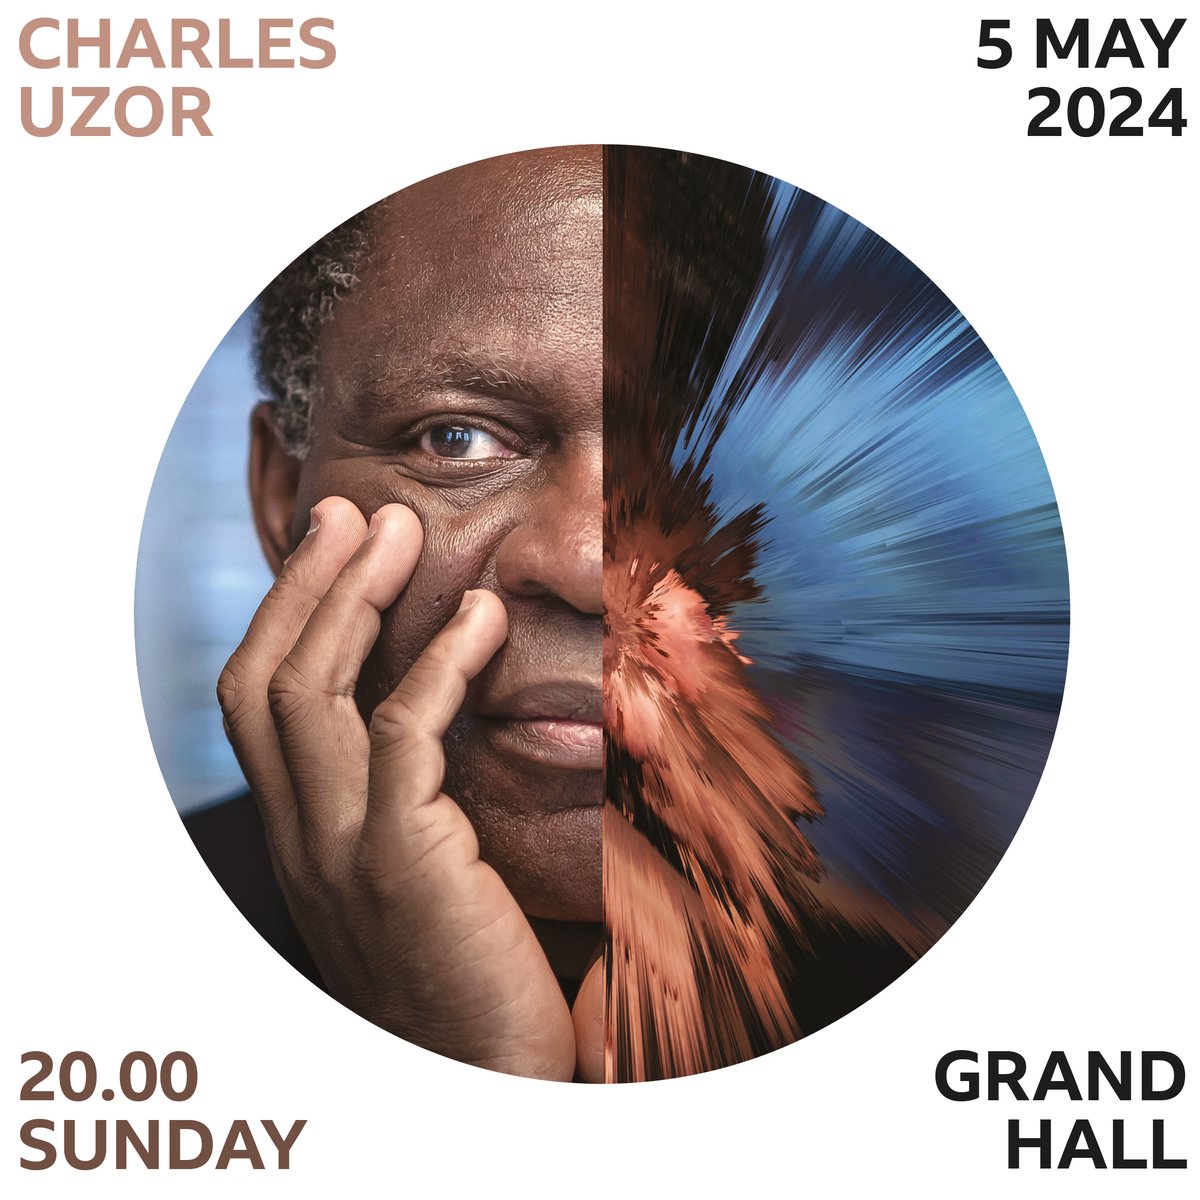 Charles Uzor revisits two existential questions: Why are we here? How did everything come to exist? More than two decades after his work 'Zimzum' Delve into the depths of human existence with his BBC commission, exploring the vigorous duality of good and evil, chaos and clarity.